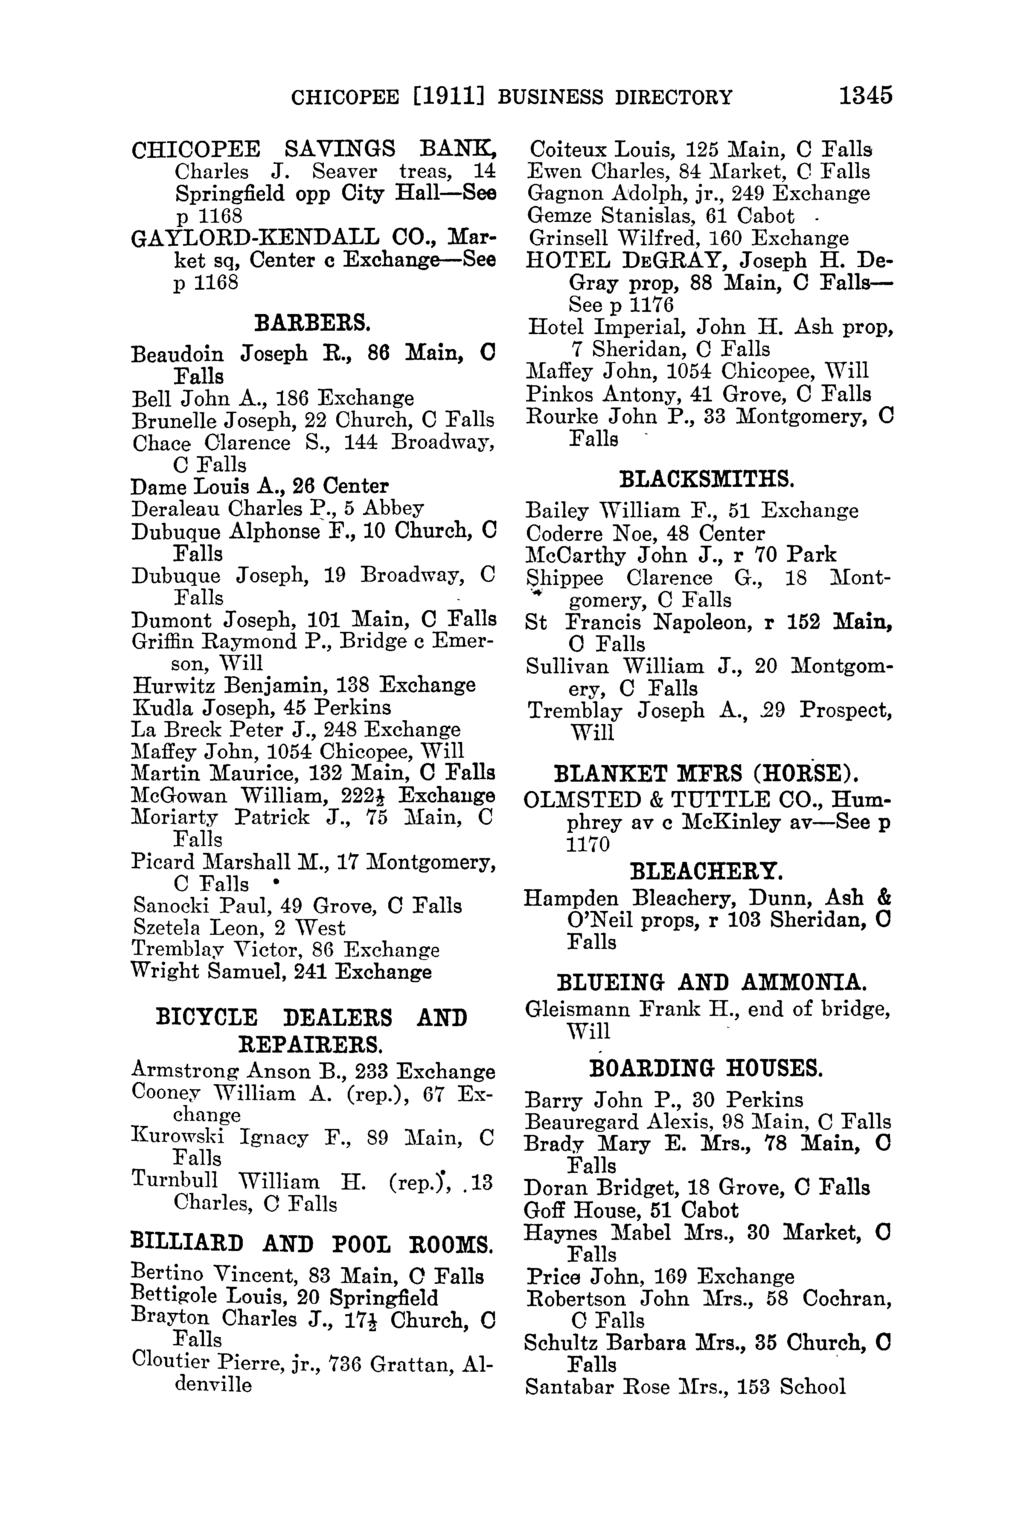 CHICOPEE [1911] BUSINESS DIRECTORY 1345 CHICOPEE SAVINGS BANK, Charles J. Seaver treas, 14 Springfield opp City Hall-See p 1168 GAYLORD-KENDALL 00., Market sq, Oenter c Exchange--See p 1168 BARBERS.